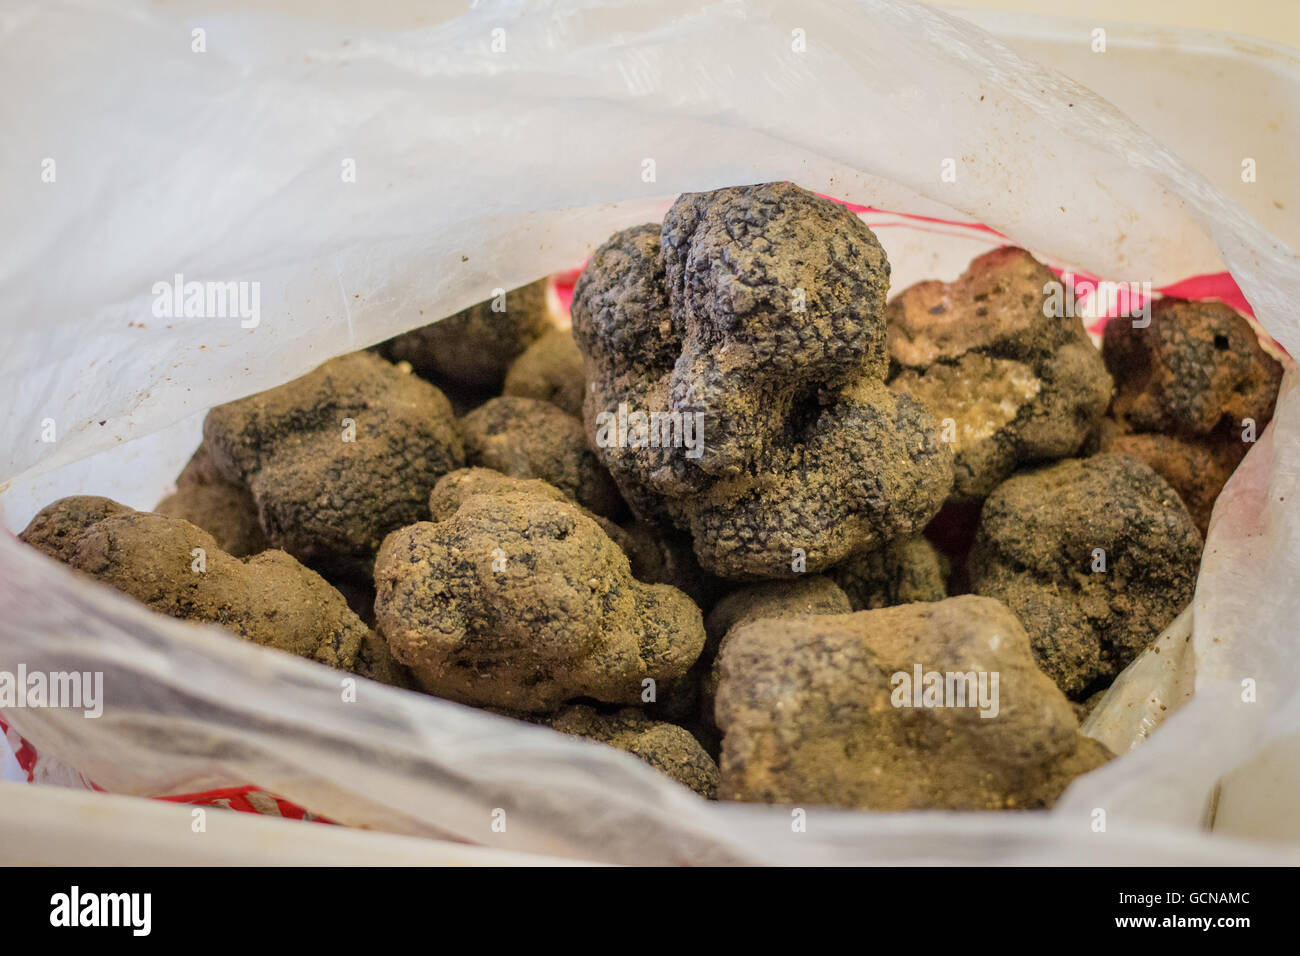 Freshly picked Burgundy truffle from France in a plastic bag Stock Photo